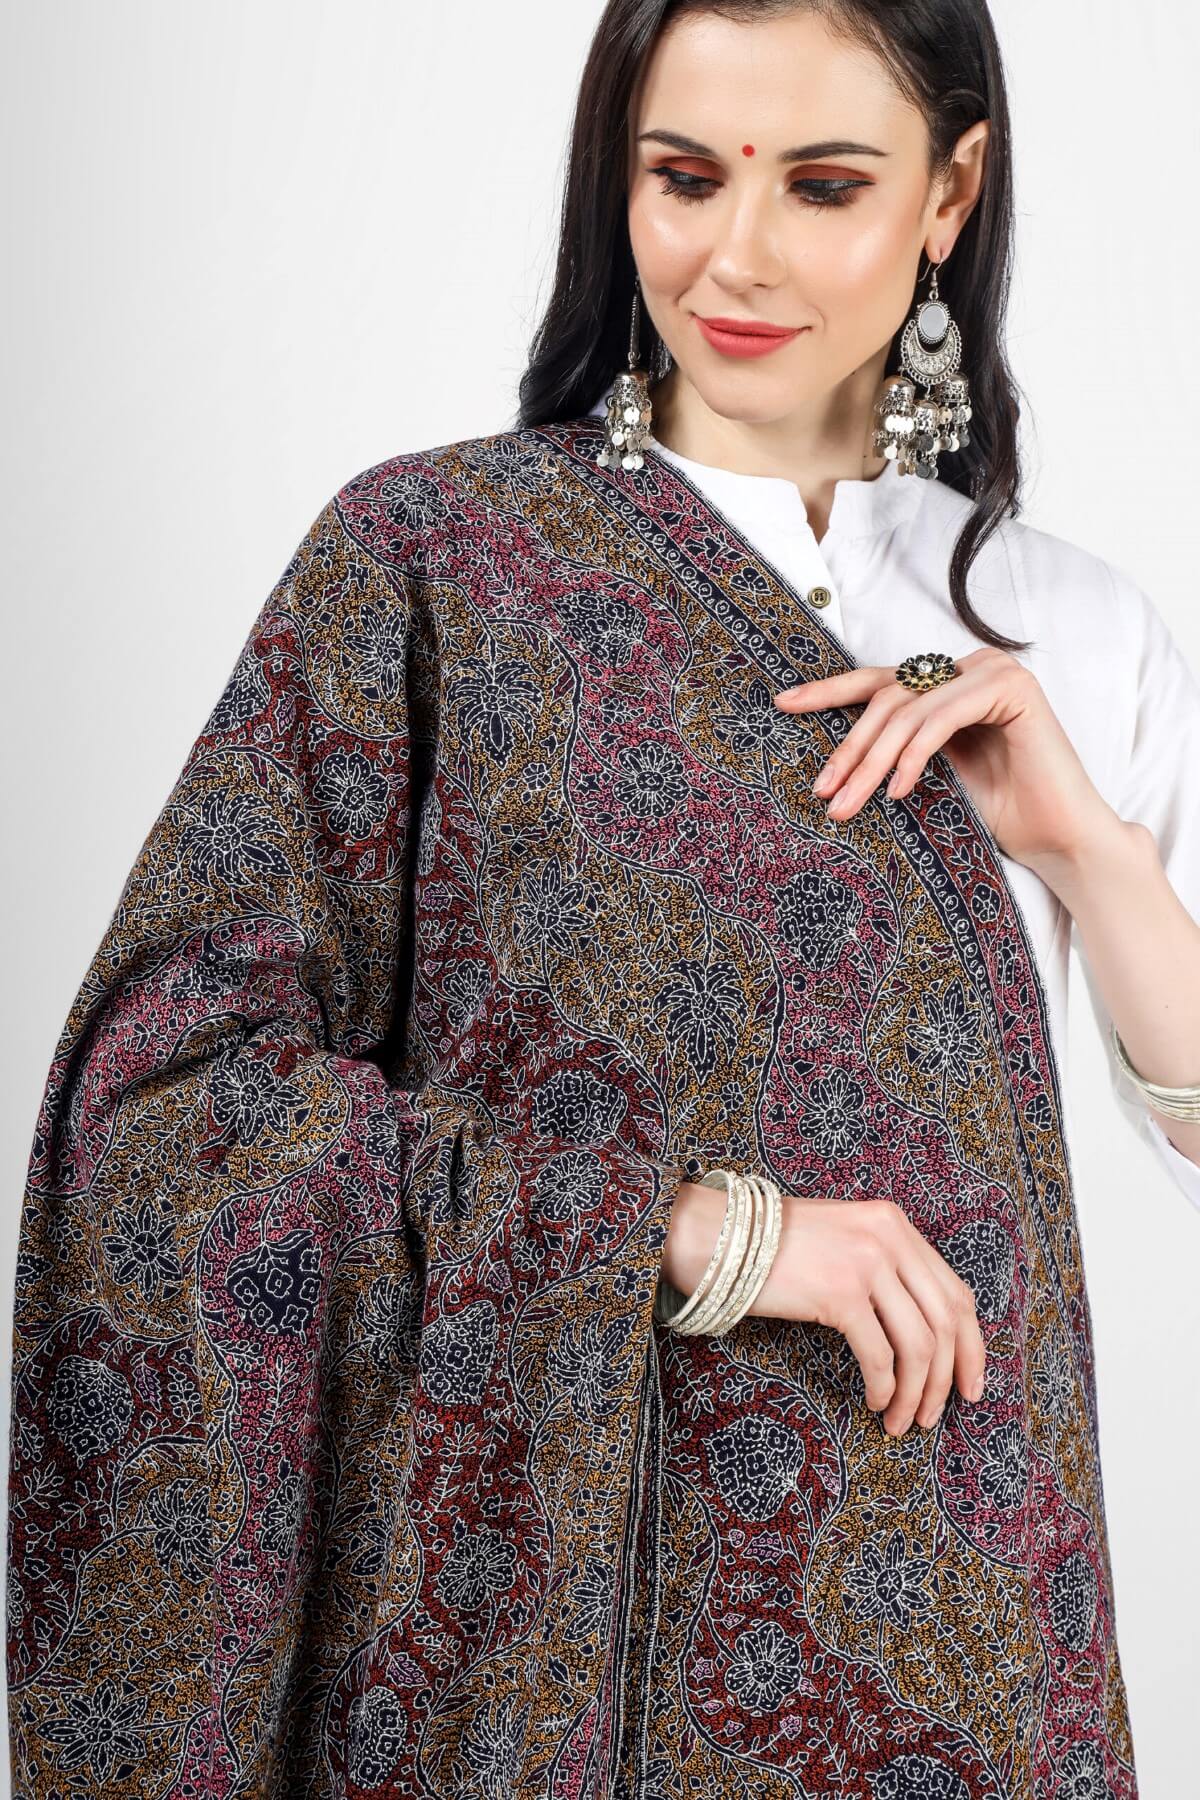 "PASHMINA SHAWL - Luxurious Comfort at Your Fingertips"  "PASHMINA SHAWLS IN DUBAI - Middle Eastern Opulence and Grace" "KEPRA PASHMINA SHAWLS - Where Quality Meets Style"